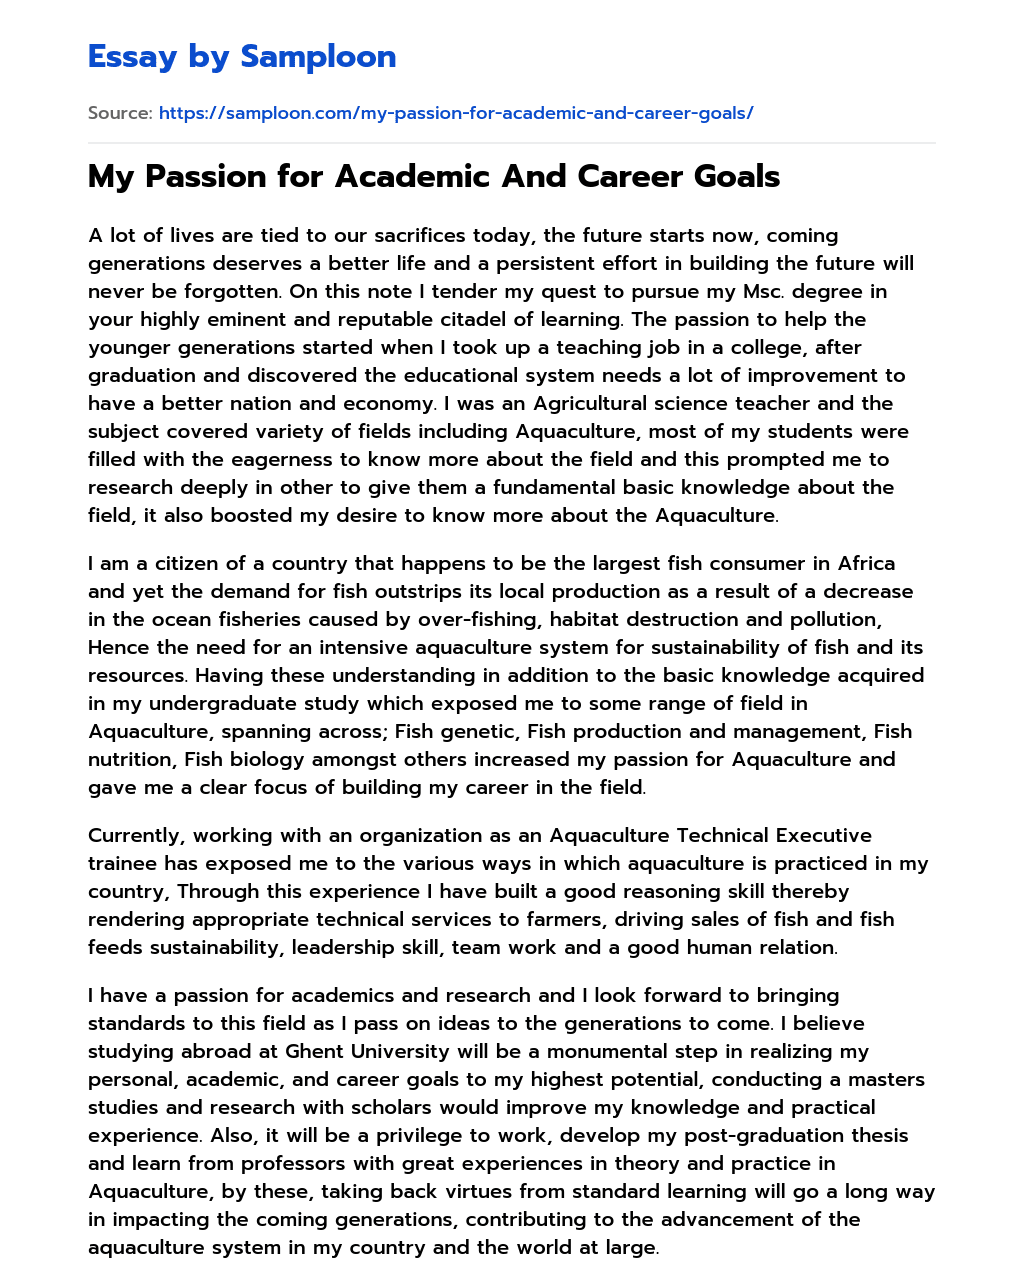 My Passion for Academic And Career Goals essay